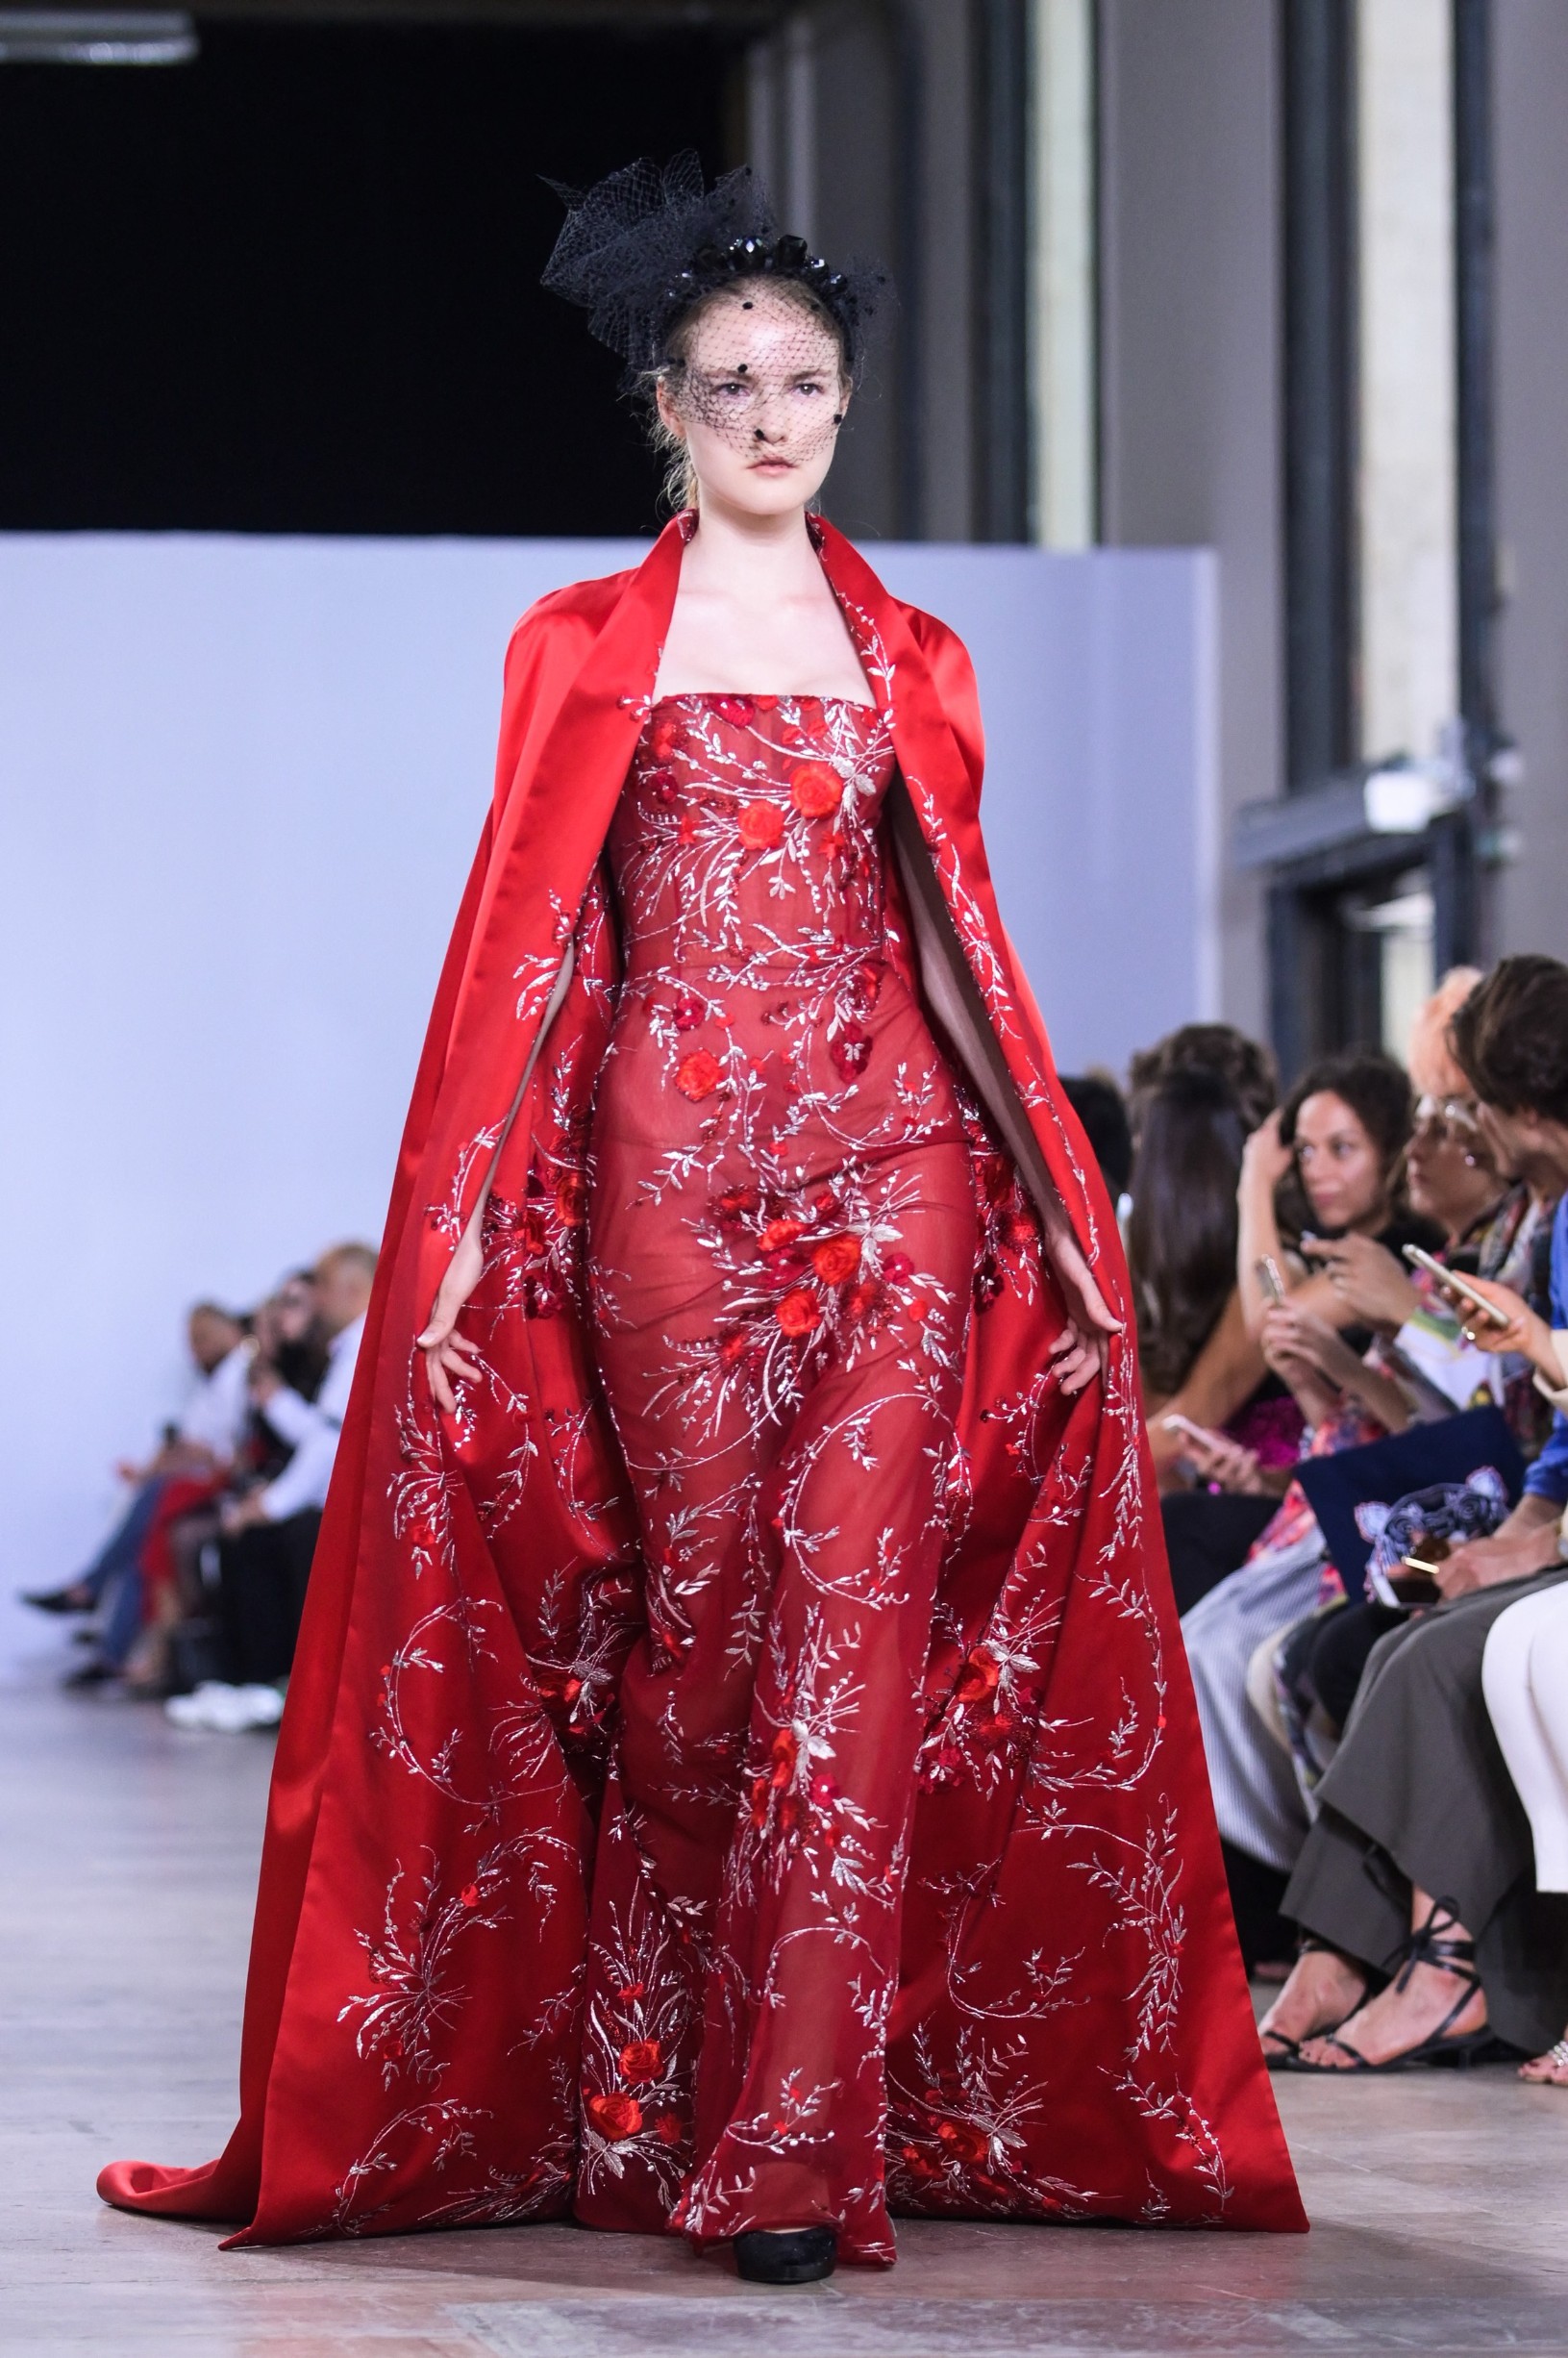 A model walks the runway during the Georges Chakra Haute Couture Fall/Winter 2019-2020 show on July 1, 2019 in Paris, France., Image: 453425982, License: Rights-managed, Restrictions: , Model Release: no, Credit line: Sebadelha Julie/ABACA / Abaca Press / Profimedia